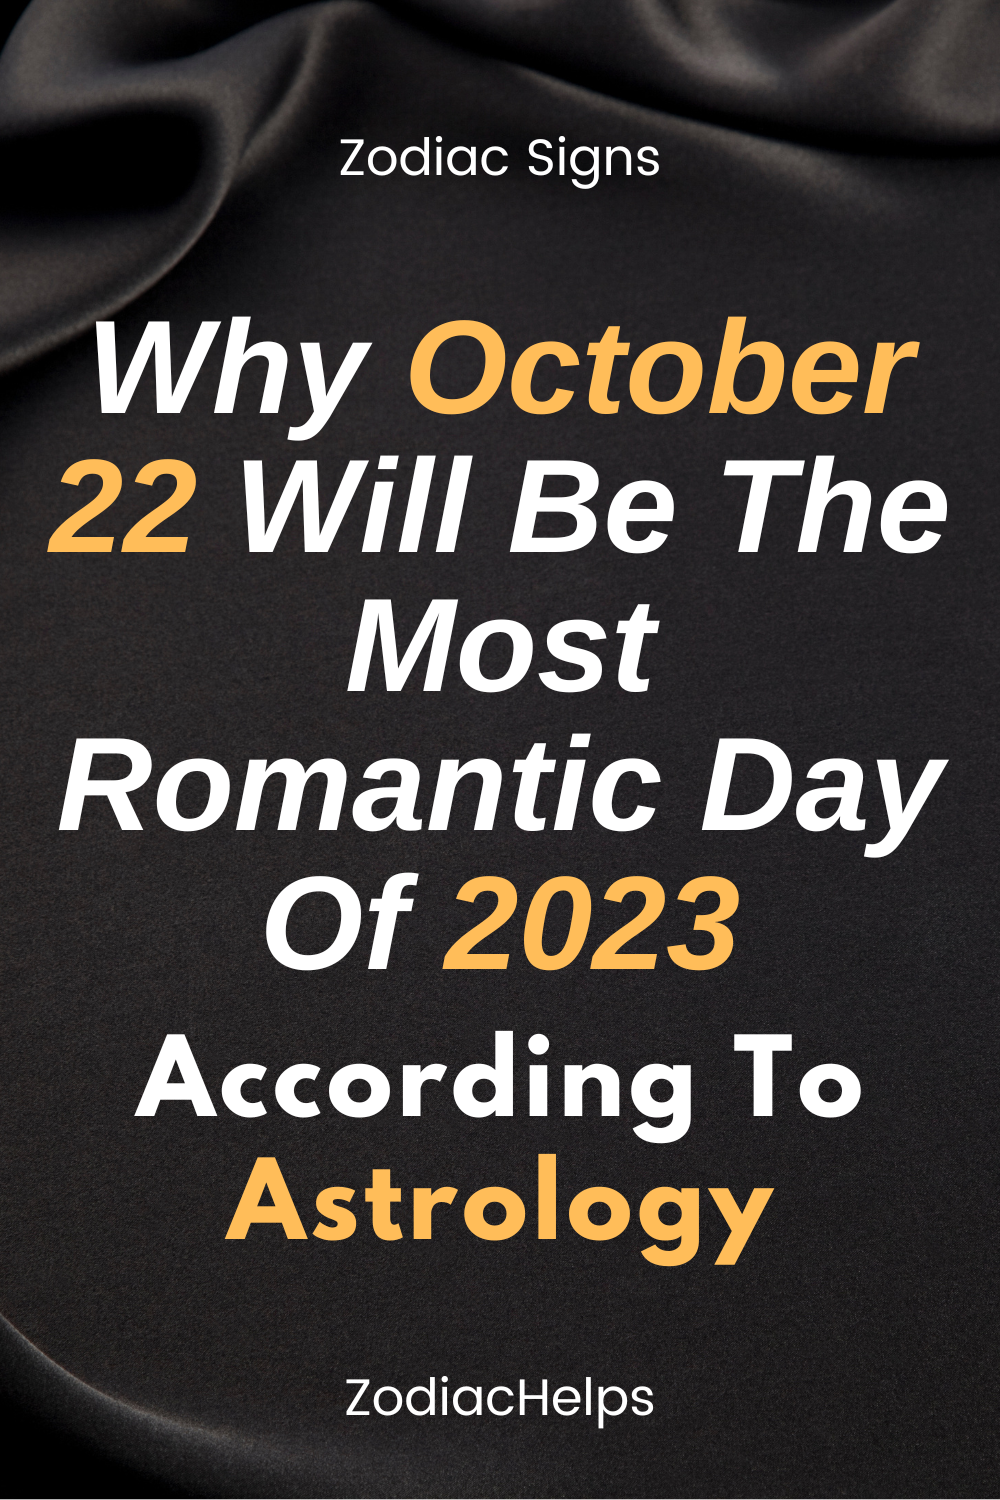 Why October 22 Will Be The Most Romantic Day Of 2023, According To Astrology